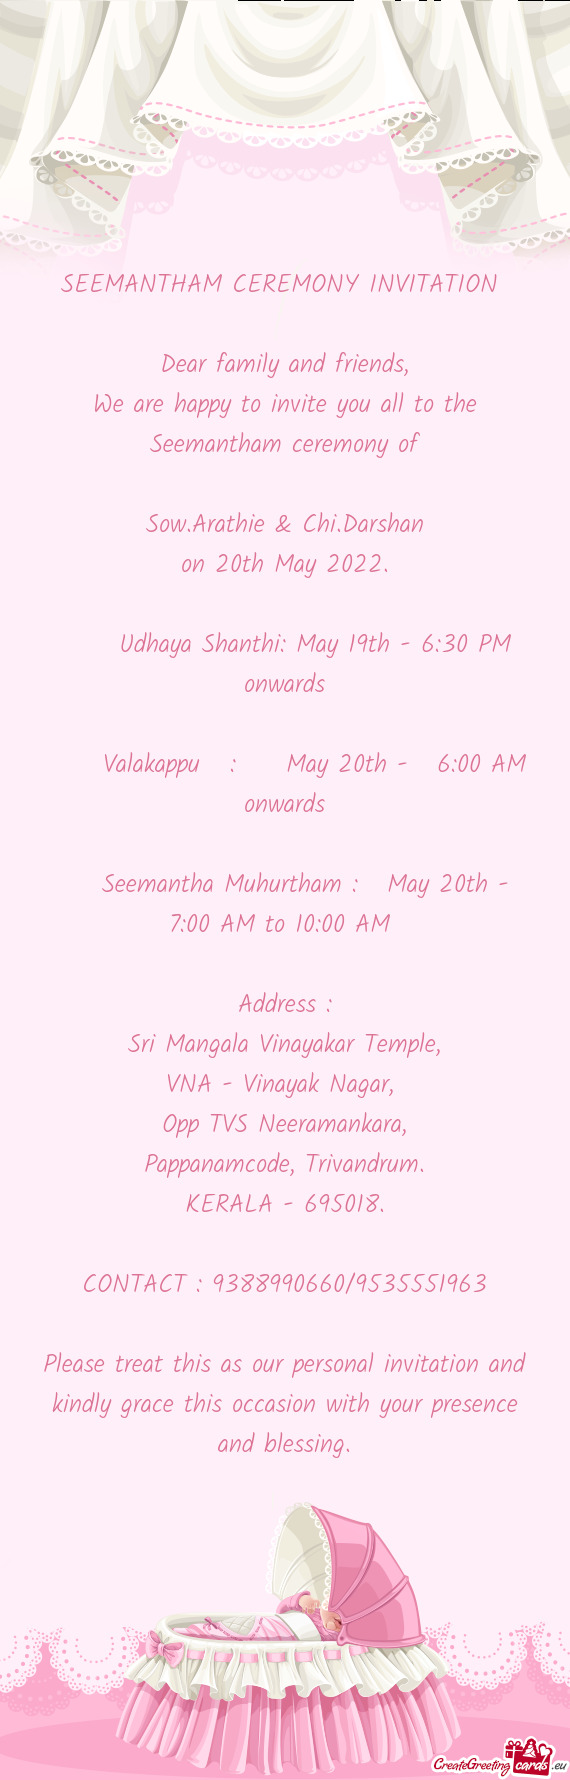 We are happy to invite you all to the Seemantham ceremony of